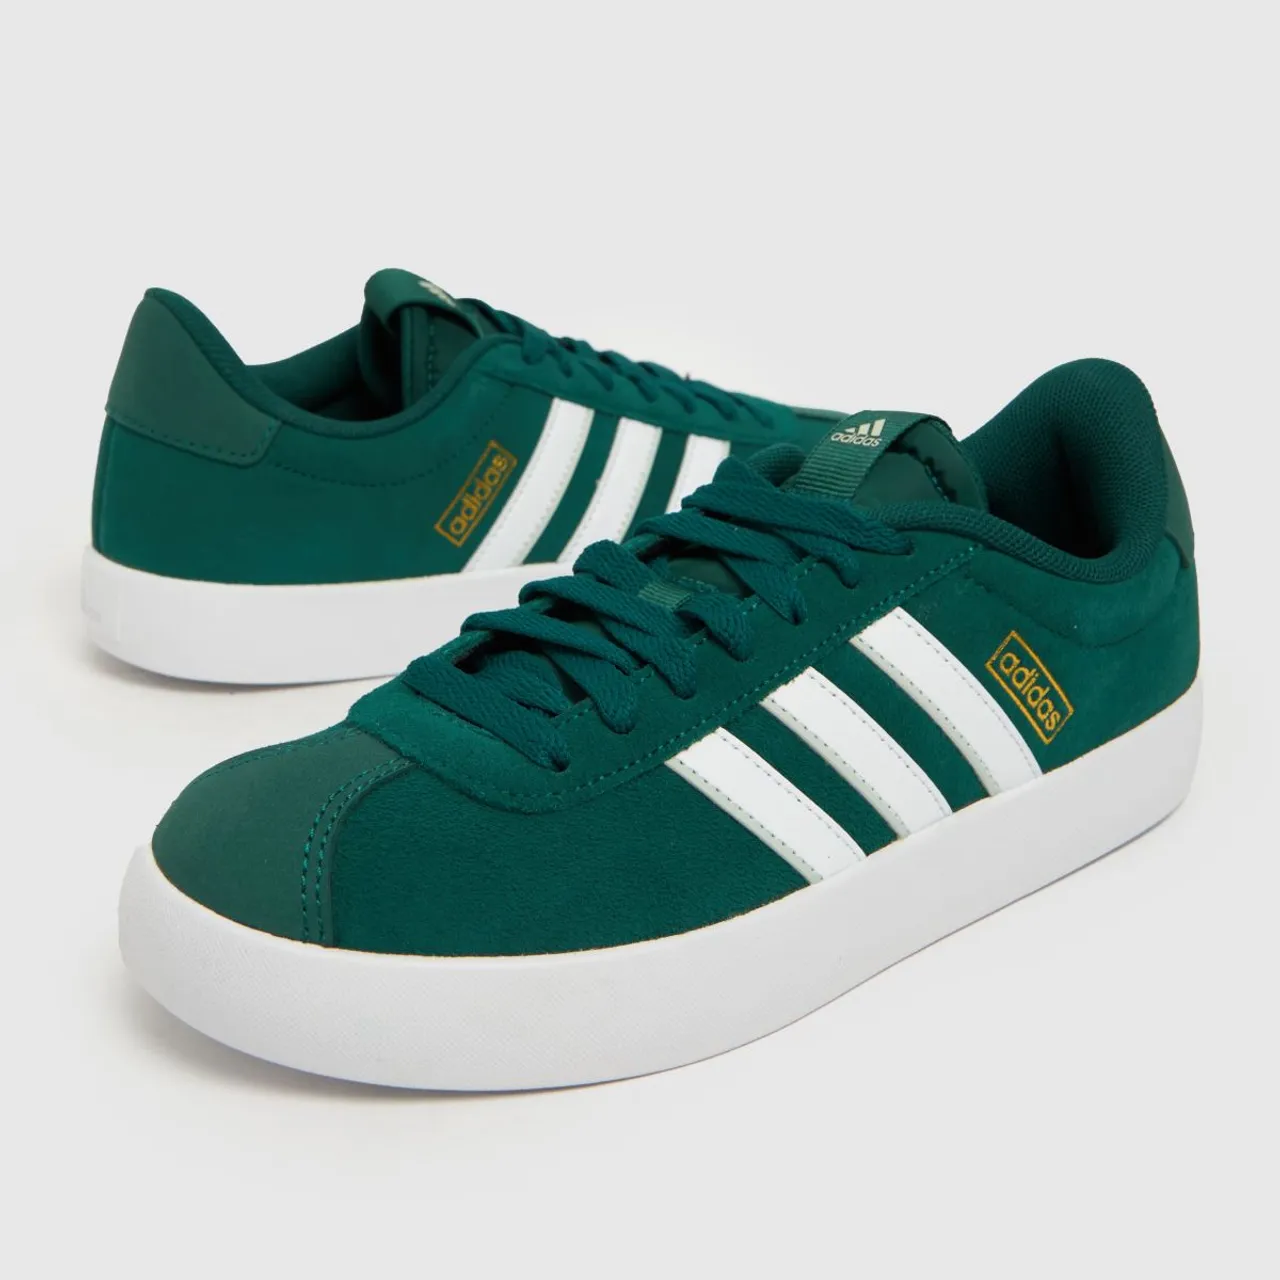 Adidas Vl Court 3.0 Trainers In White & Green